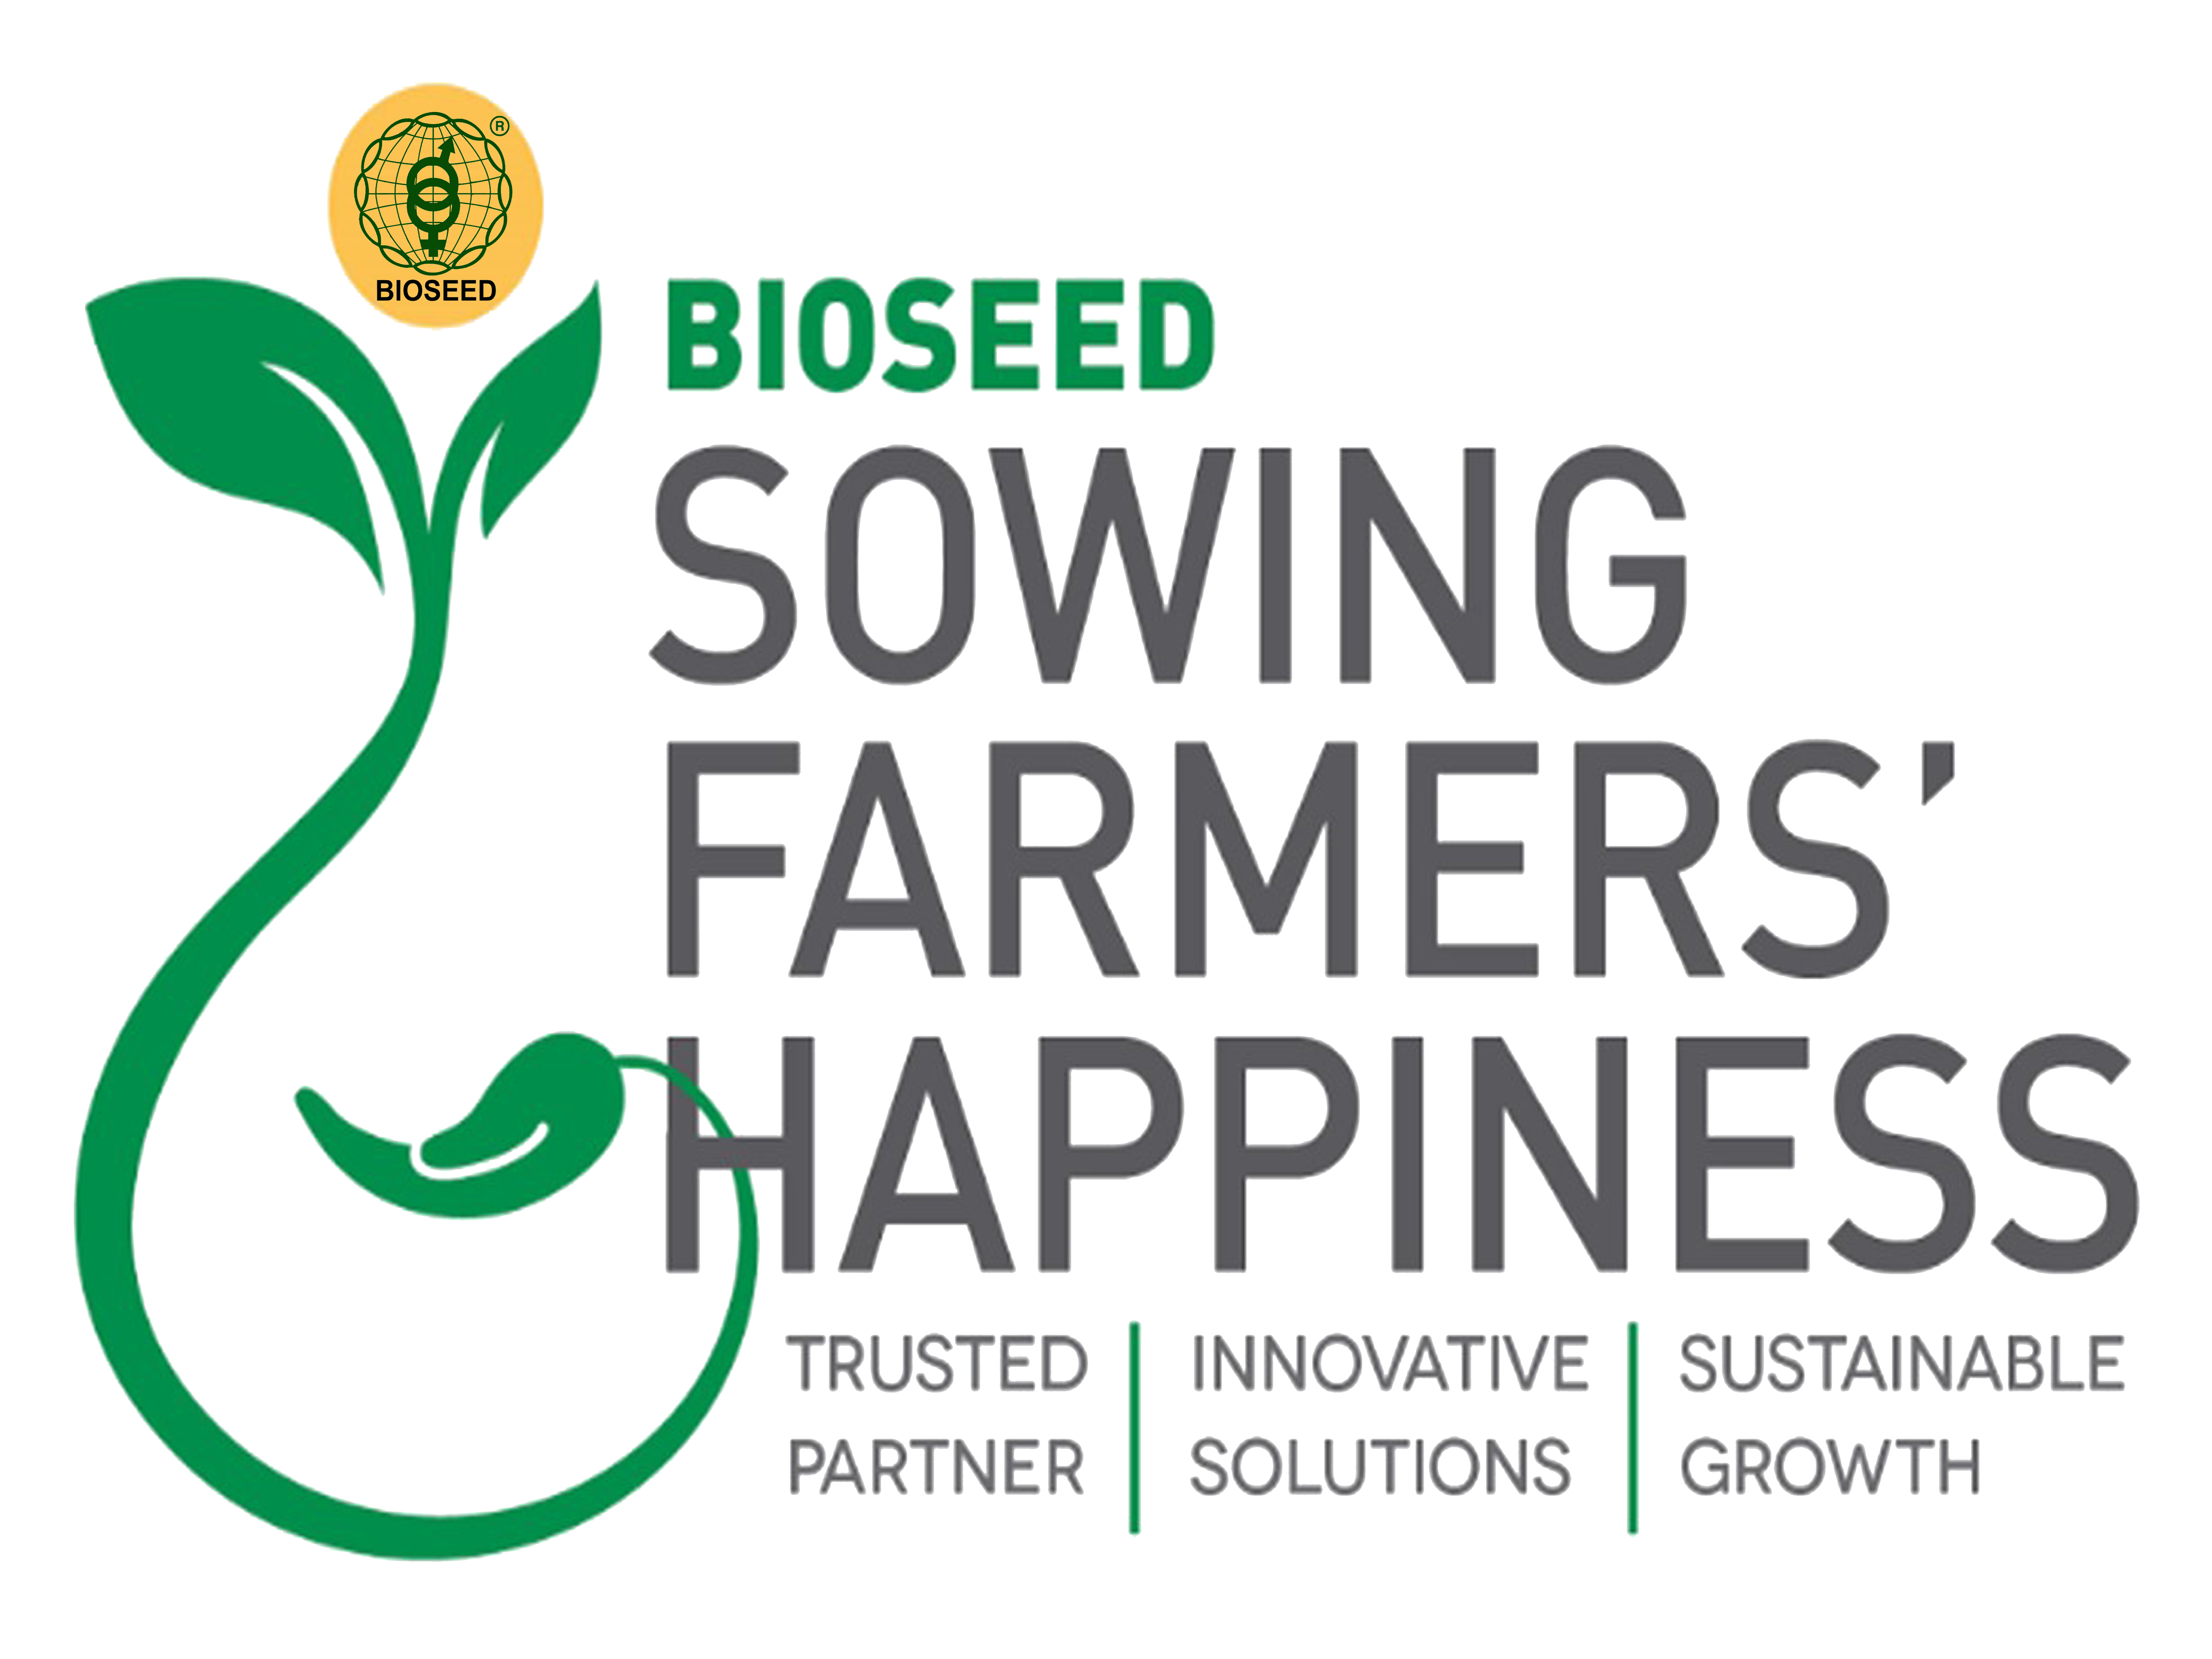 Sowing Farmers happiness